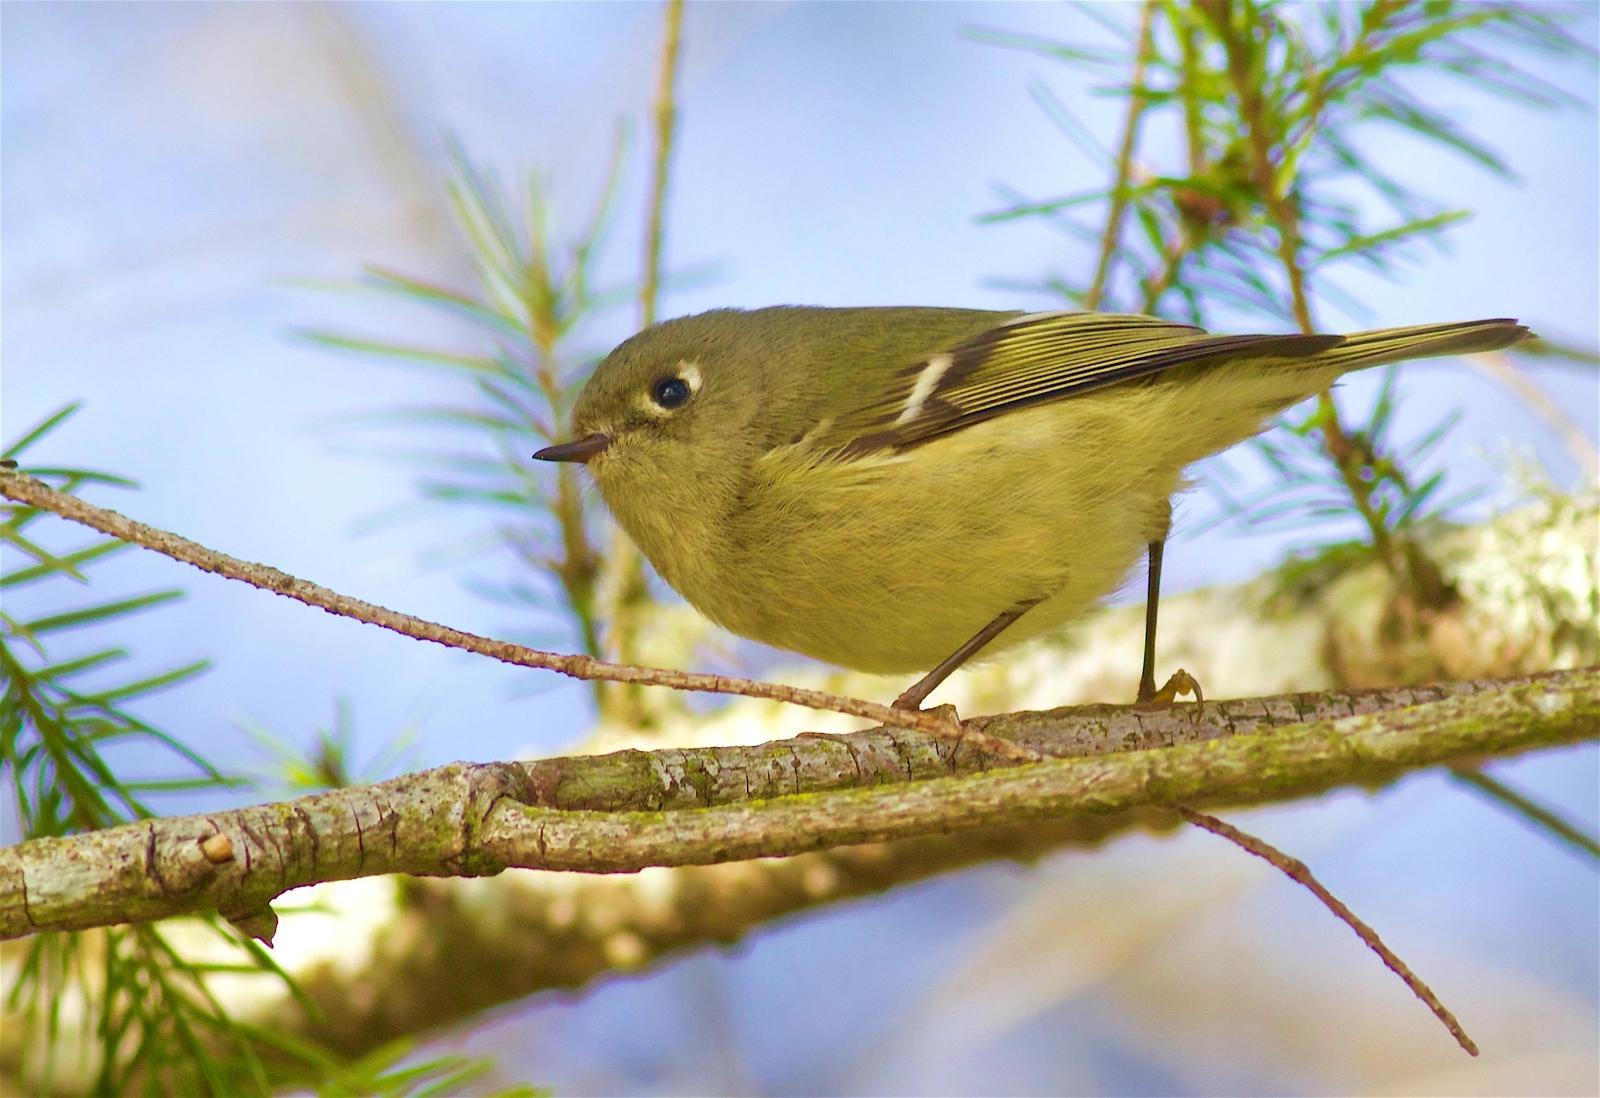 Ruby-crowned Kinglet Photo by Kathryn Keith